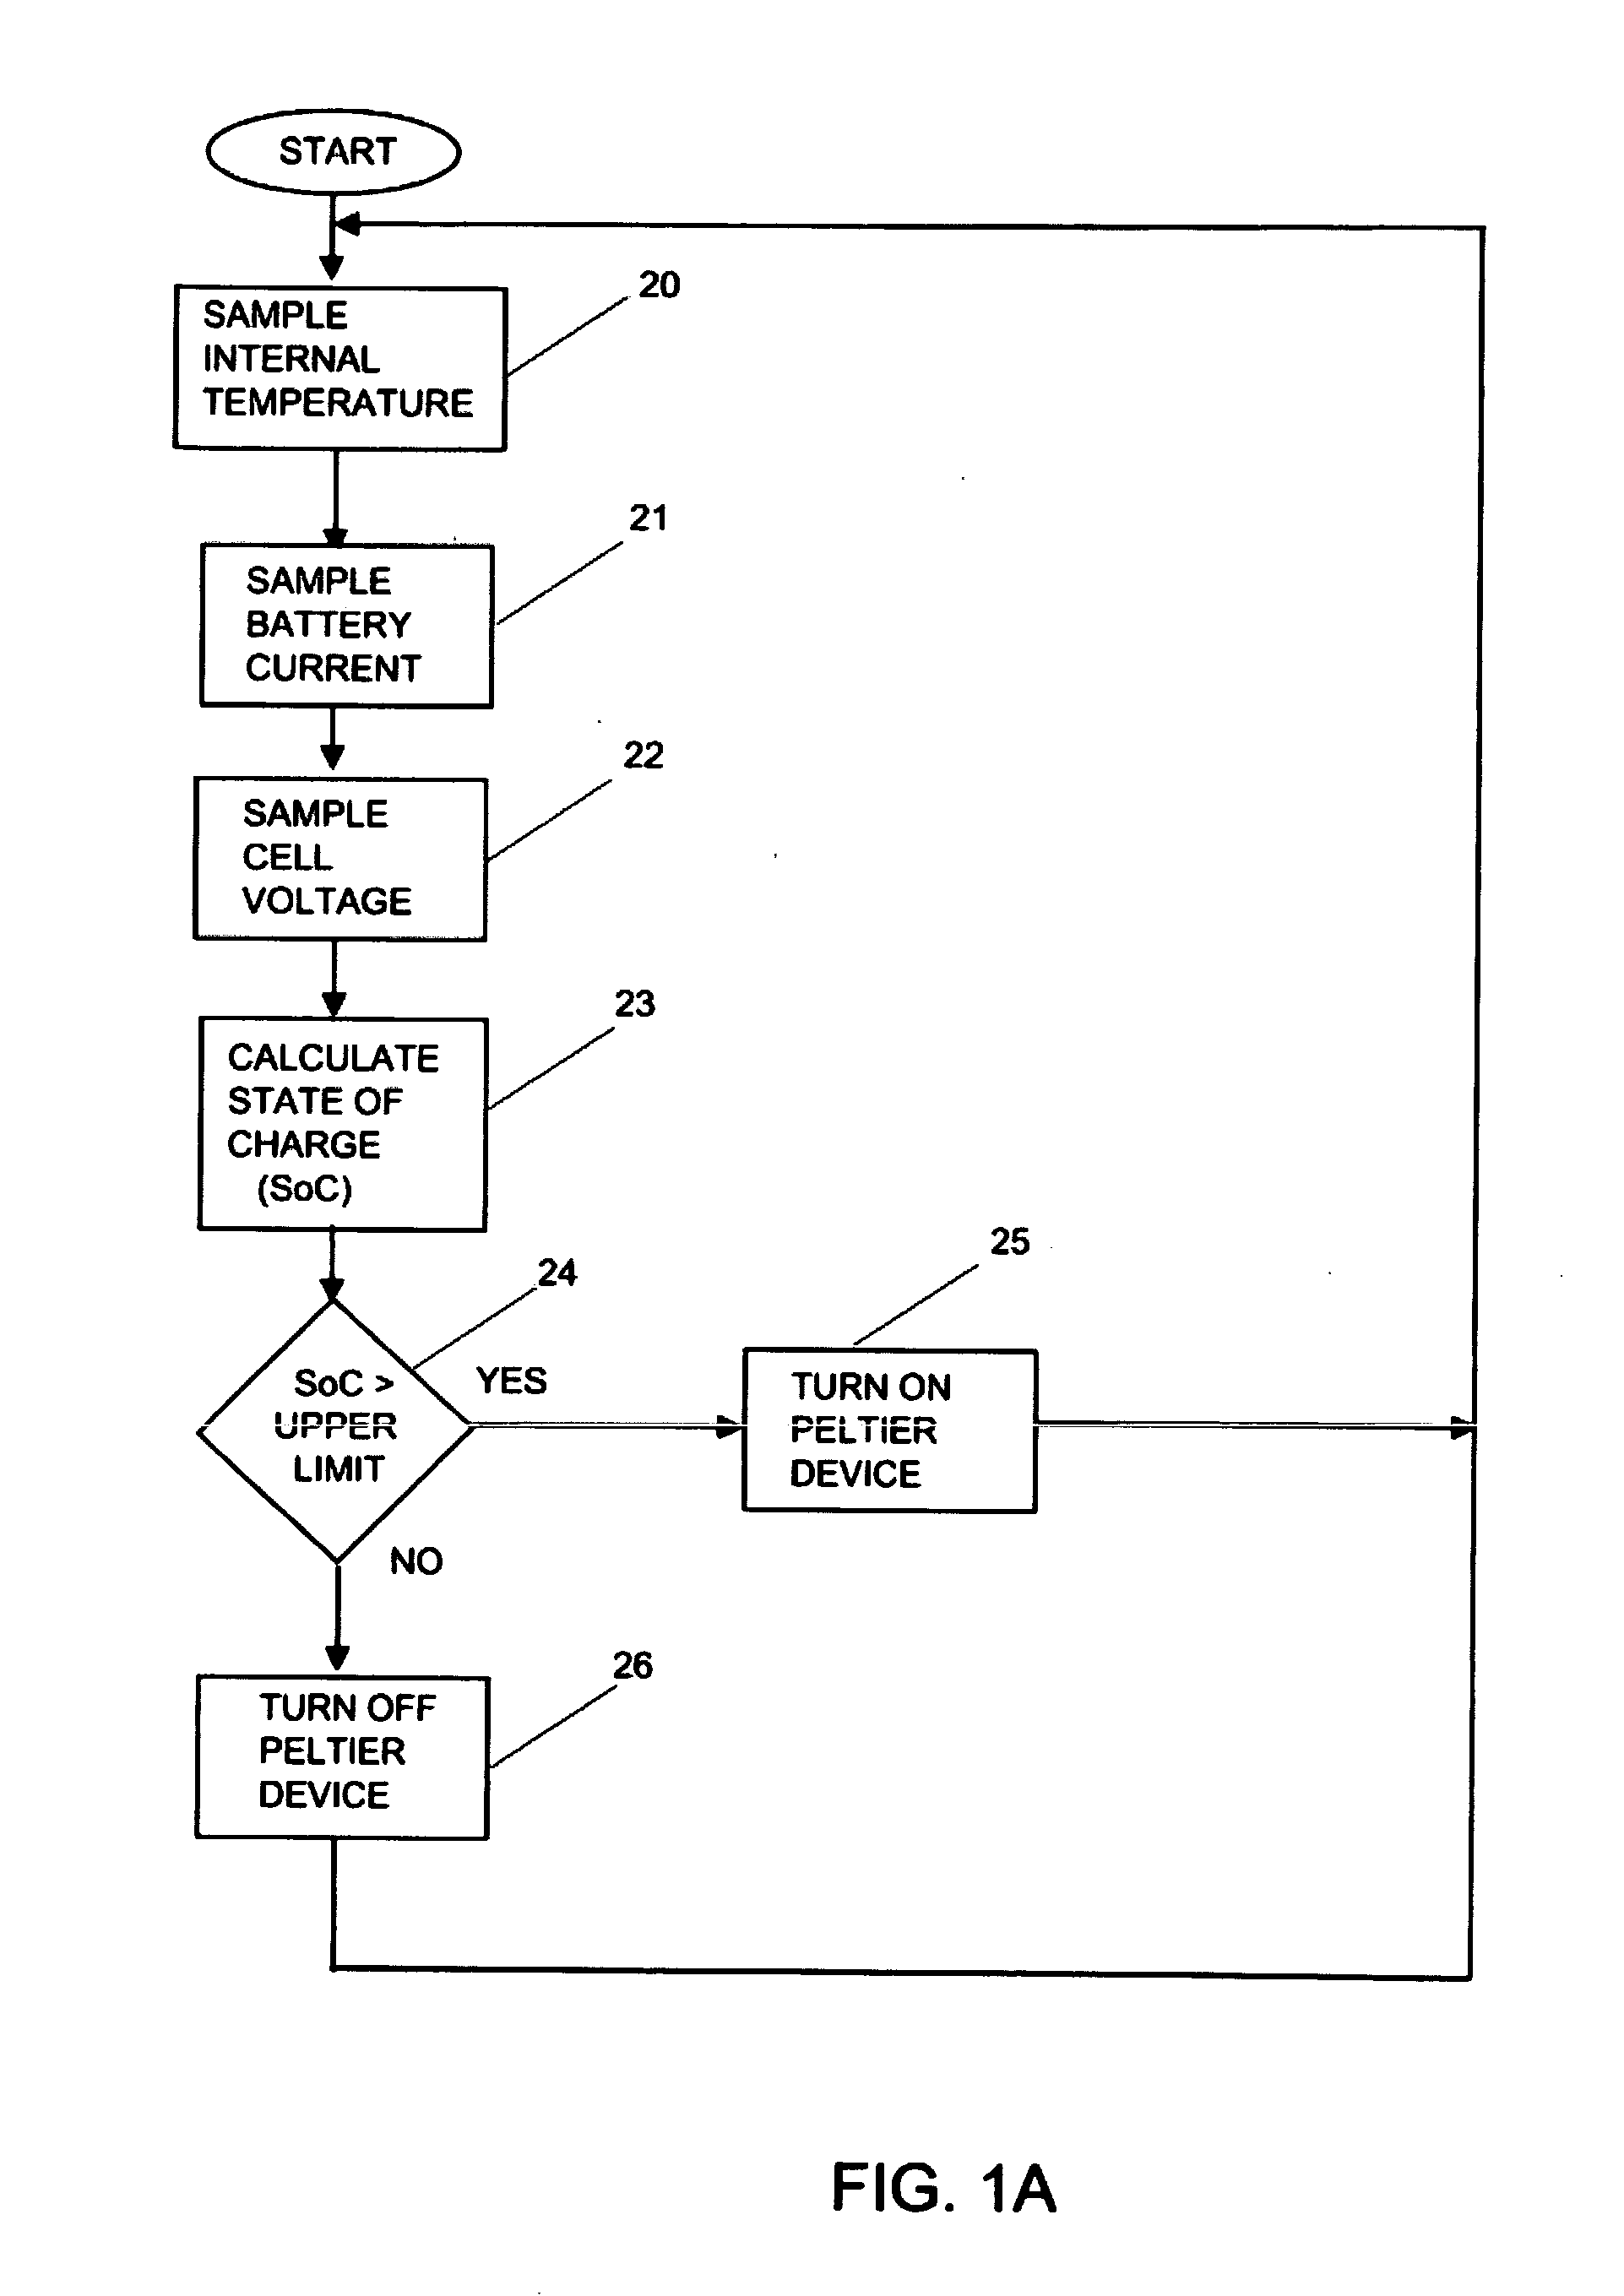 Integrated battery management system for vehicles